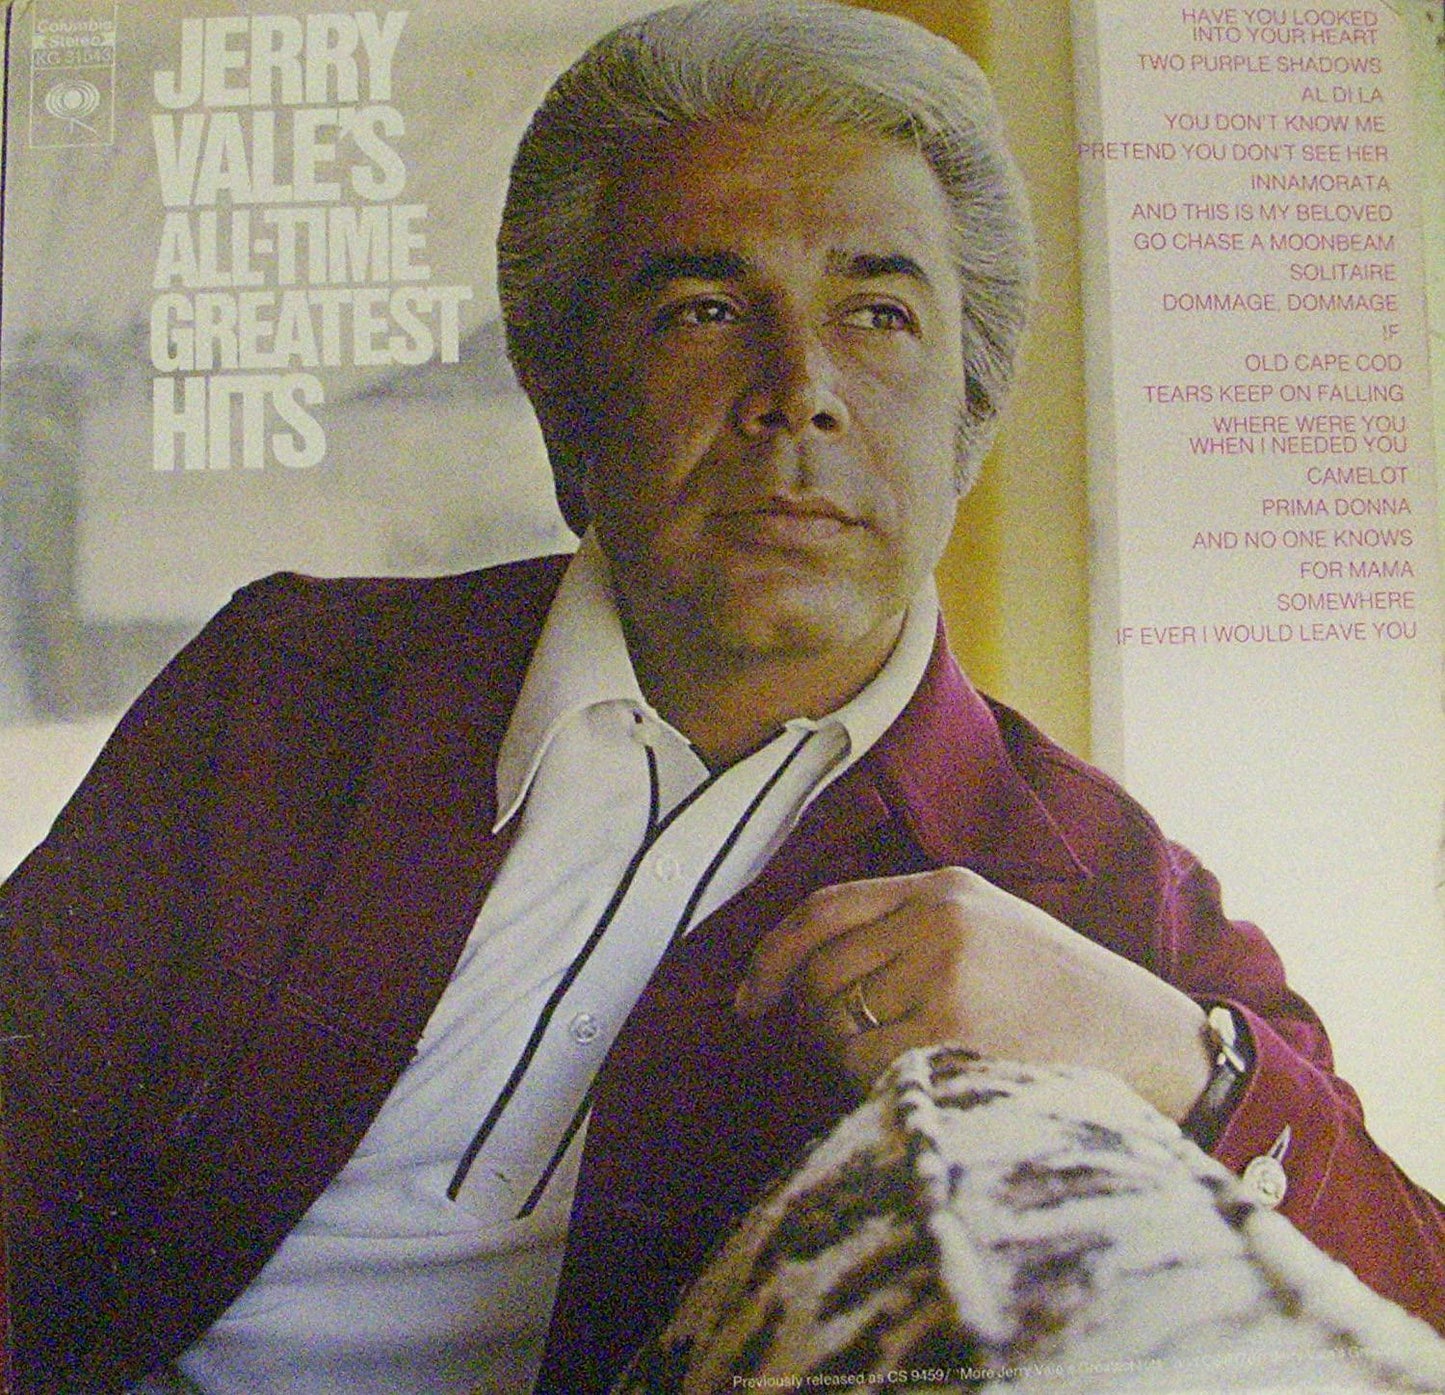 Jerry Vale's All-Time Greatest Hits Double LP